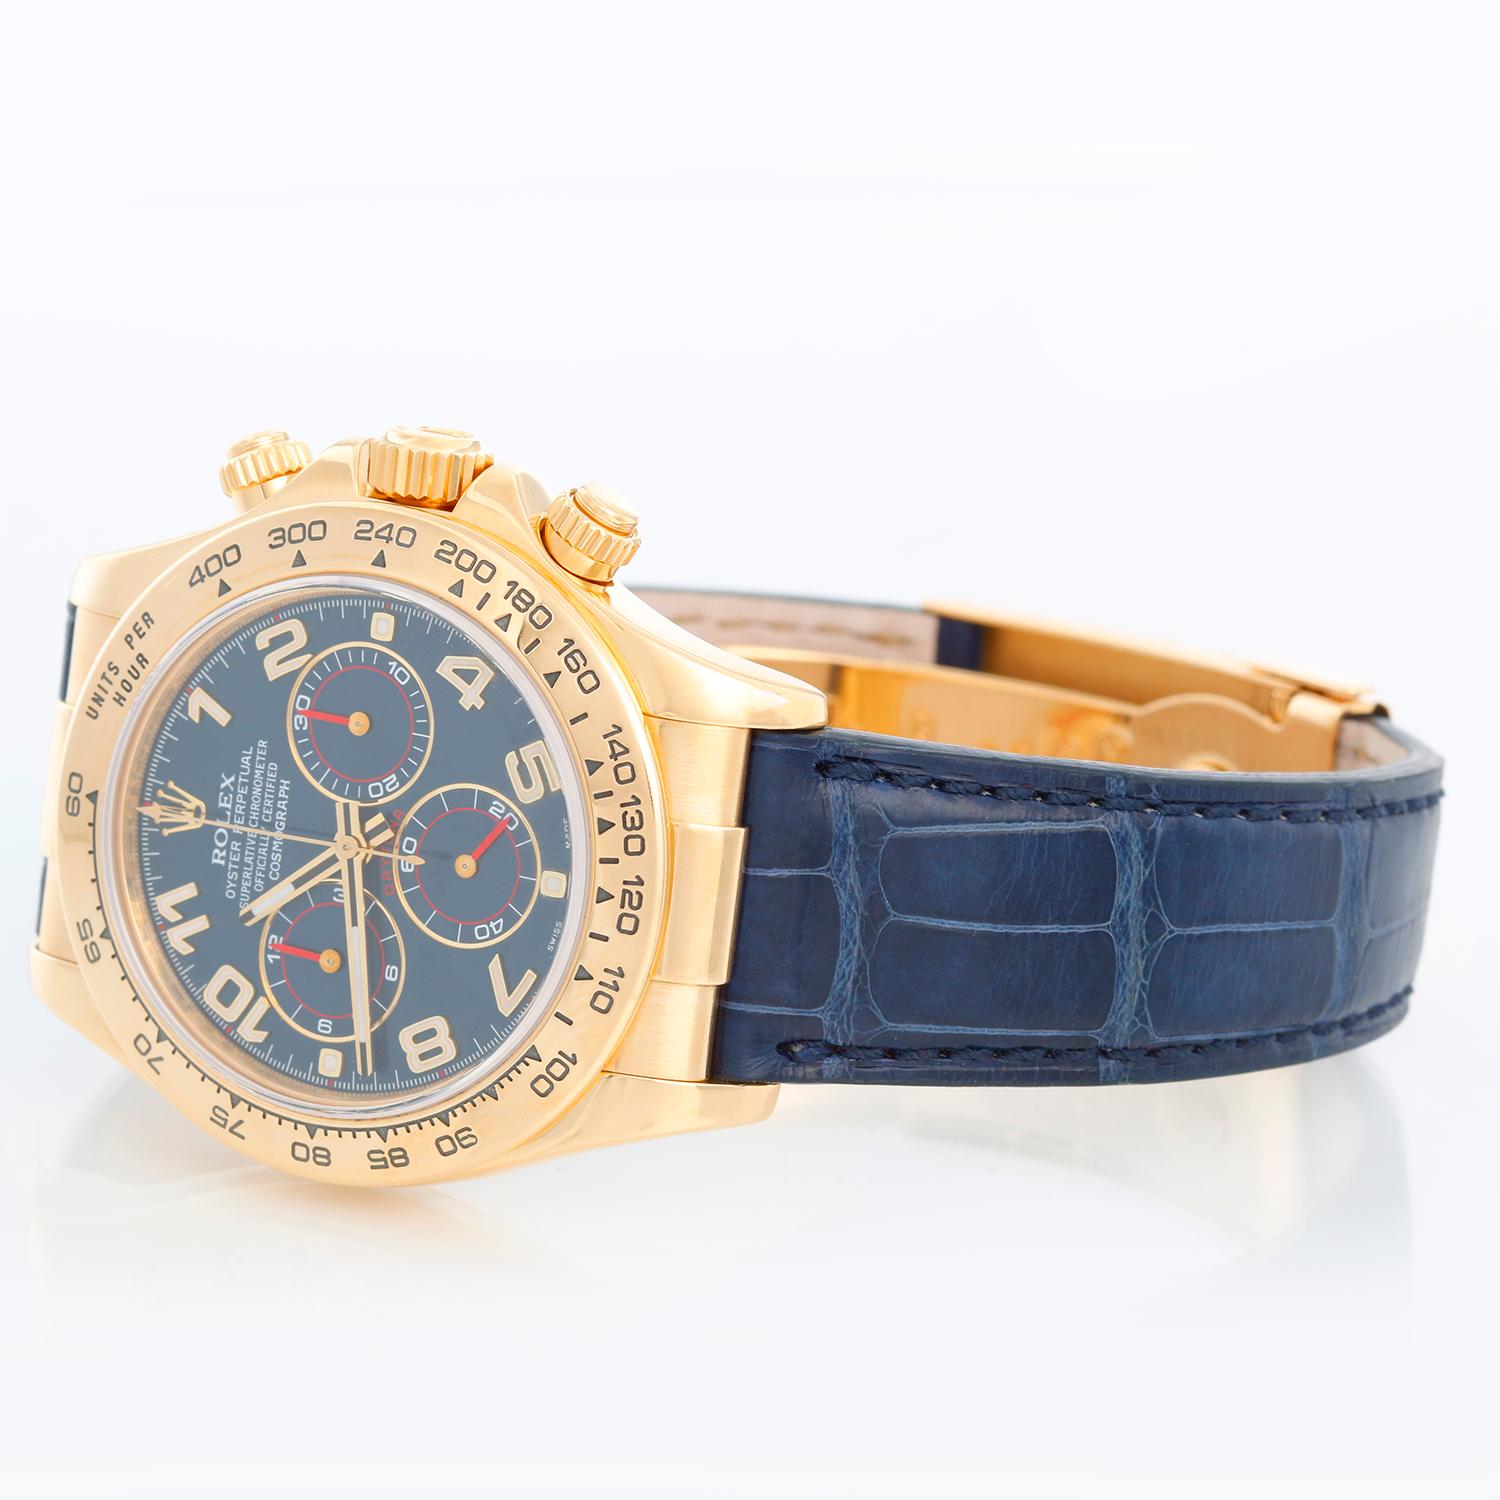 Rolex Cosmograph Daytona Men's 18k Yellow Gold Watch 116518 - Automatic winding, chronograph, 44 jewels, sapphire crystal. 18k yellow gold case and bezel with stickers. Blue racing dial. Blue Rolex leather strap with 18k yellow gold deployant clasp.